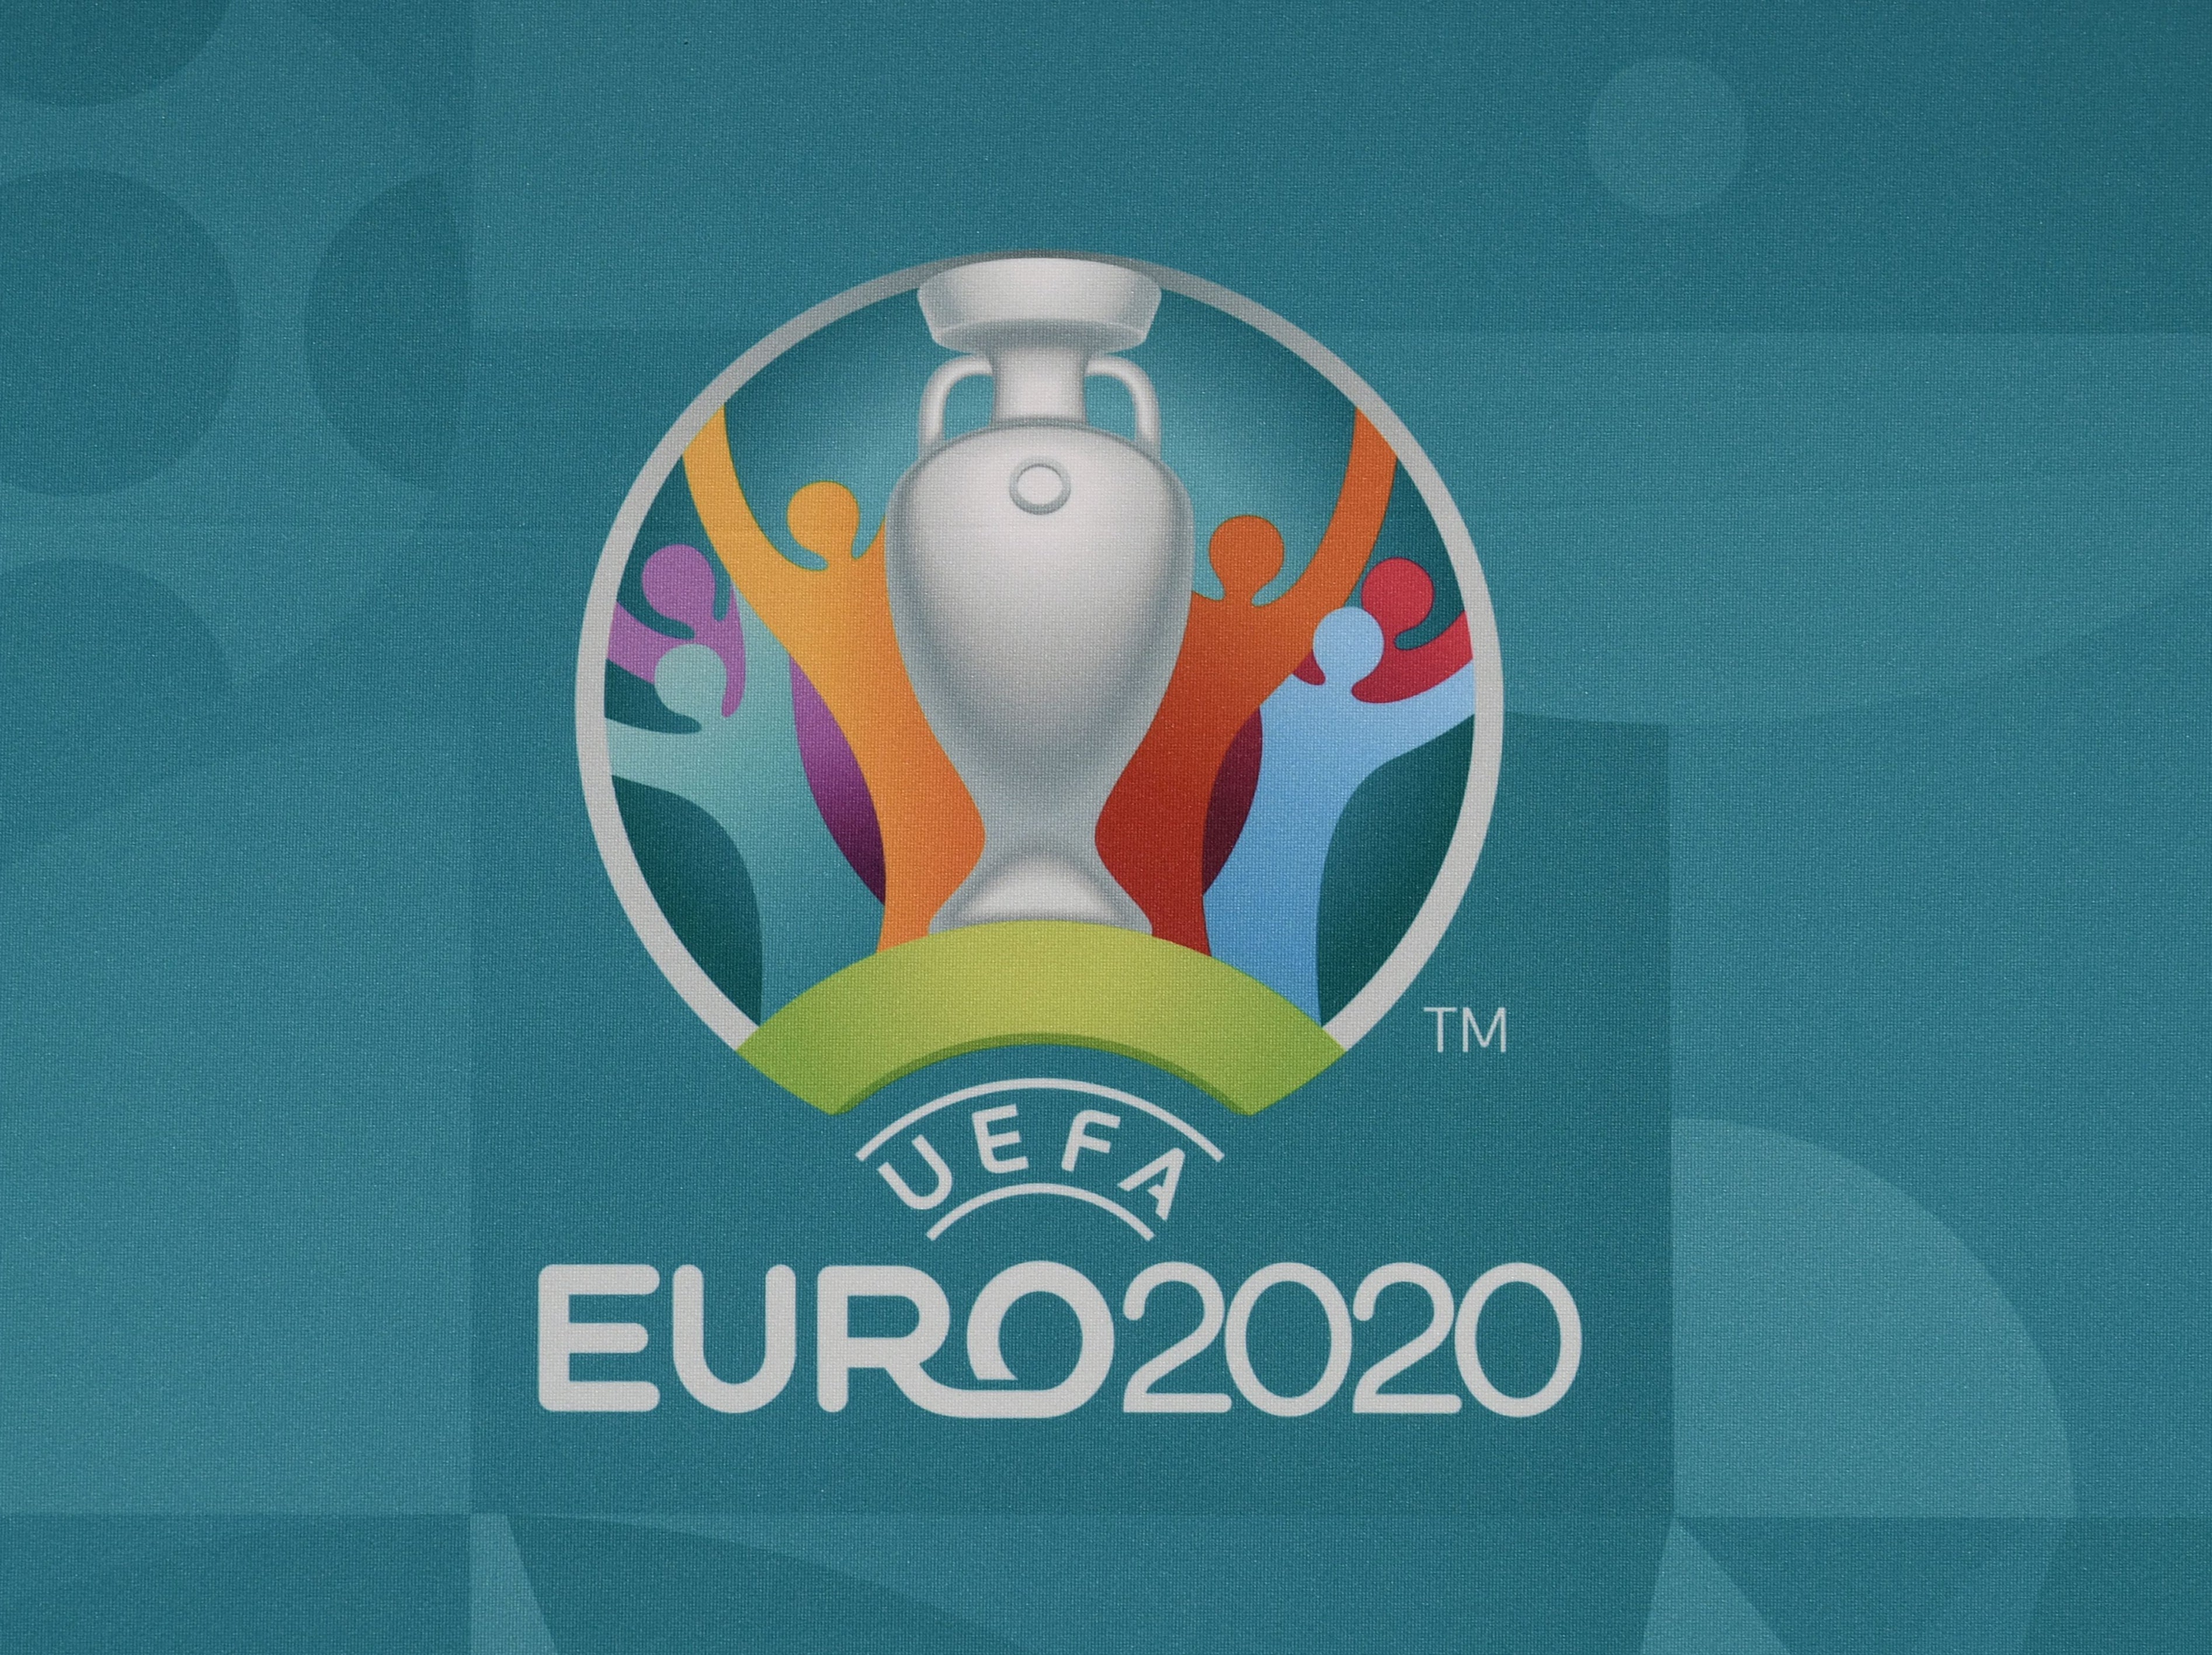 Euro 2020 was delayed last summer until this year due to the coronavirus pandemic